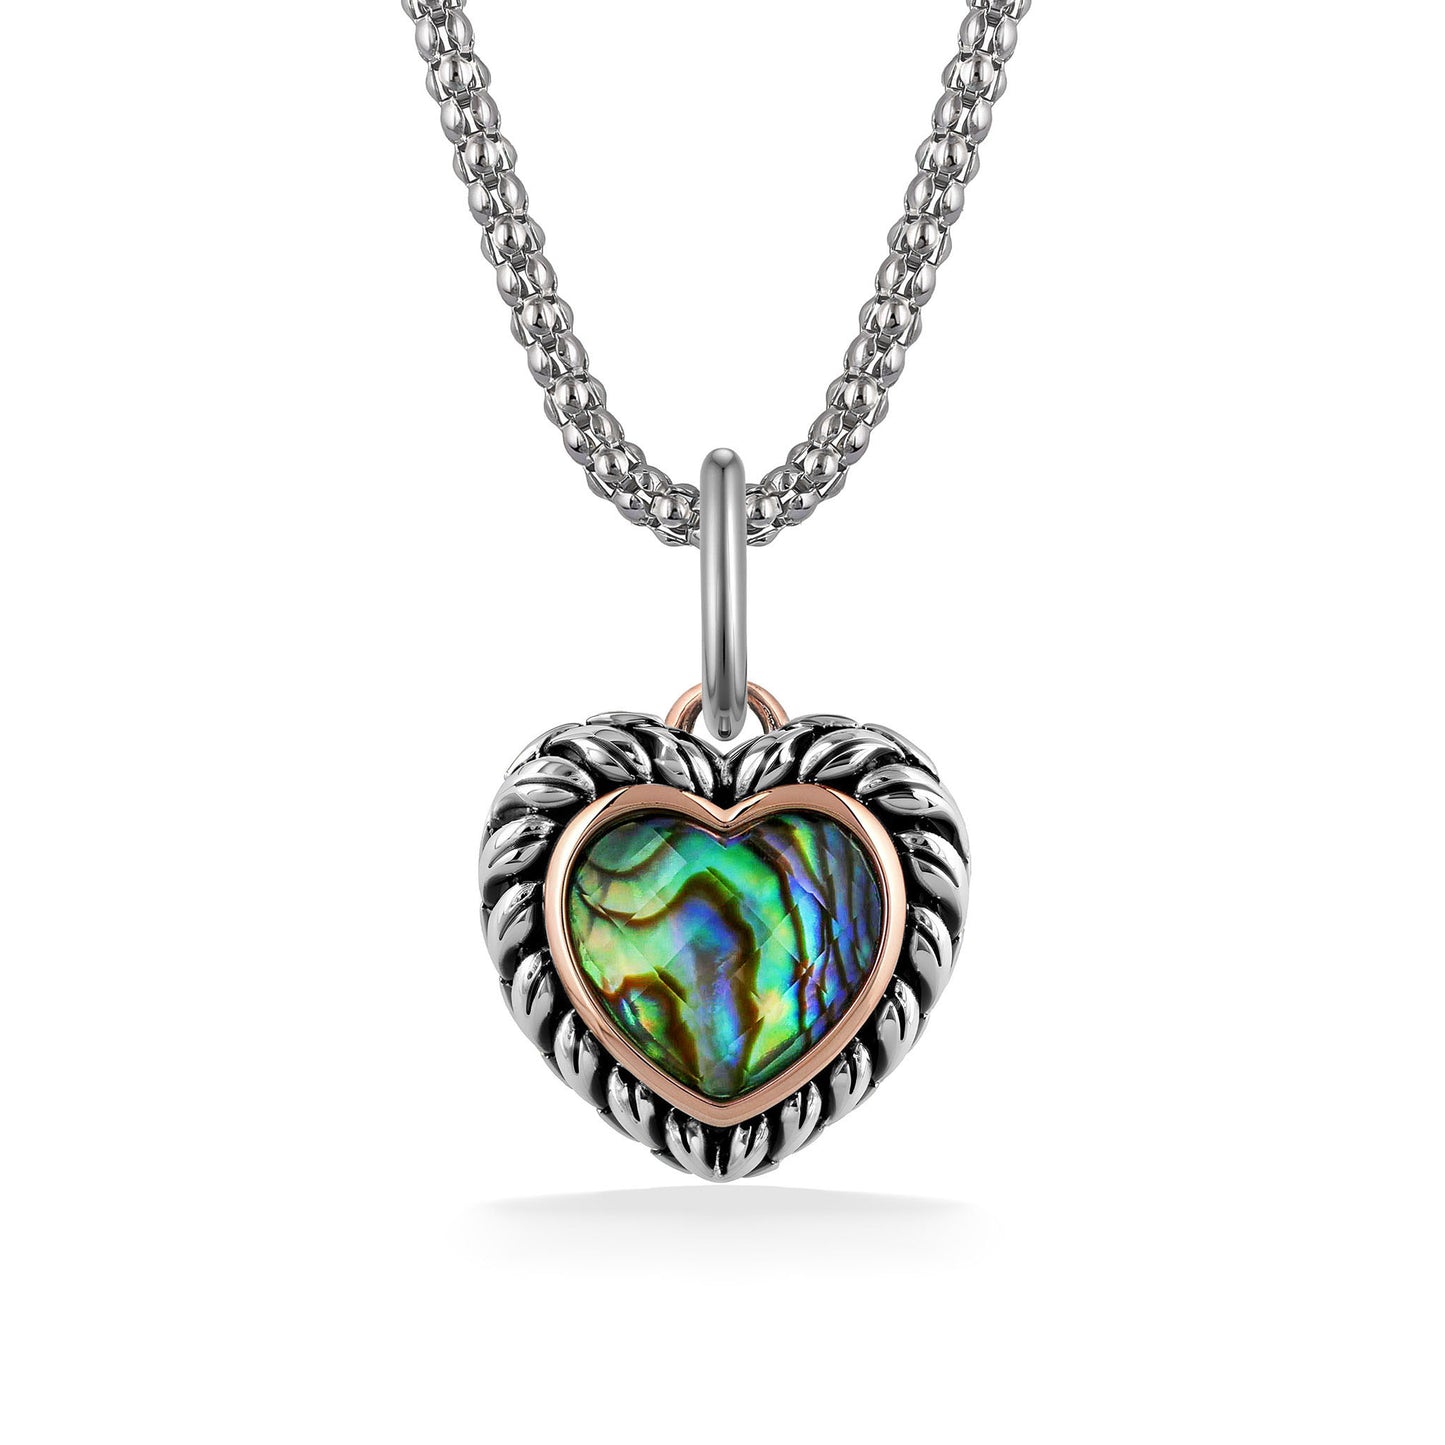 44847 - 14K Rose Gold and Sterling Silver  - Abalone and Quartz Heart Pendant